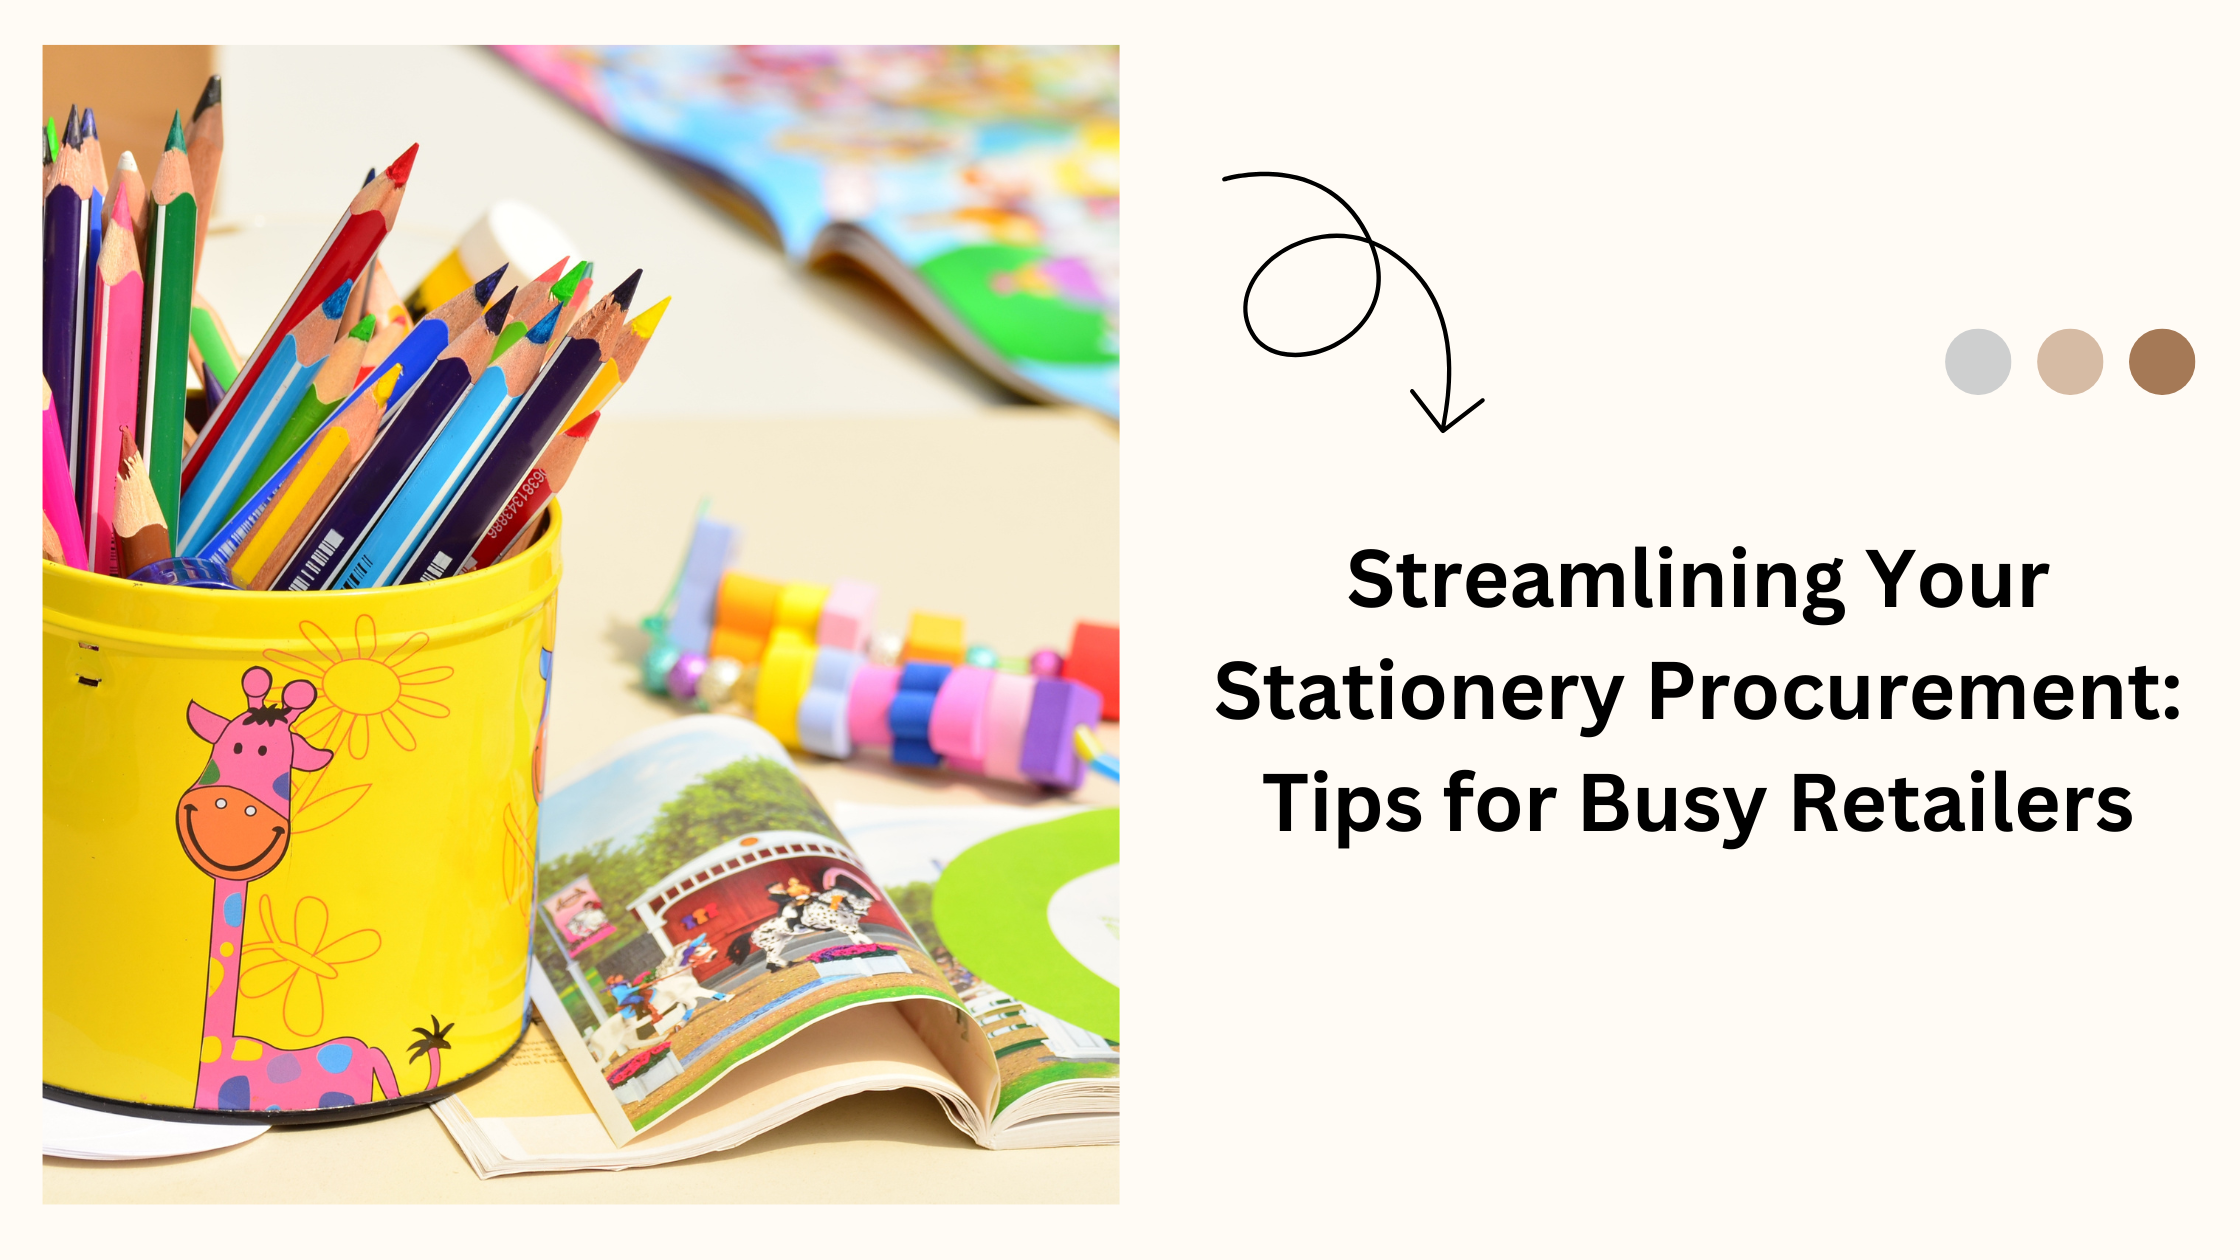 Streamlining Your Stationery Procurement: Tips for Busy Retailers